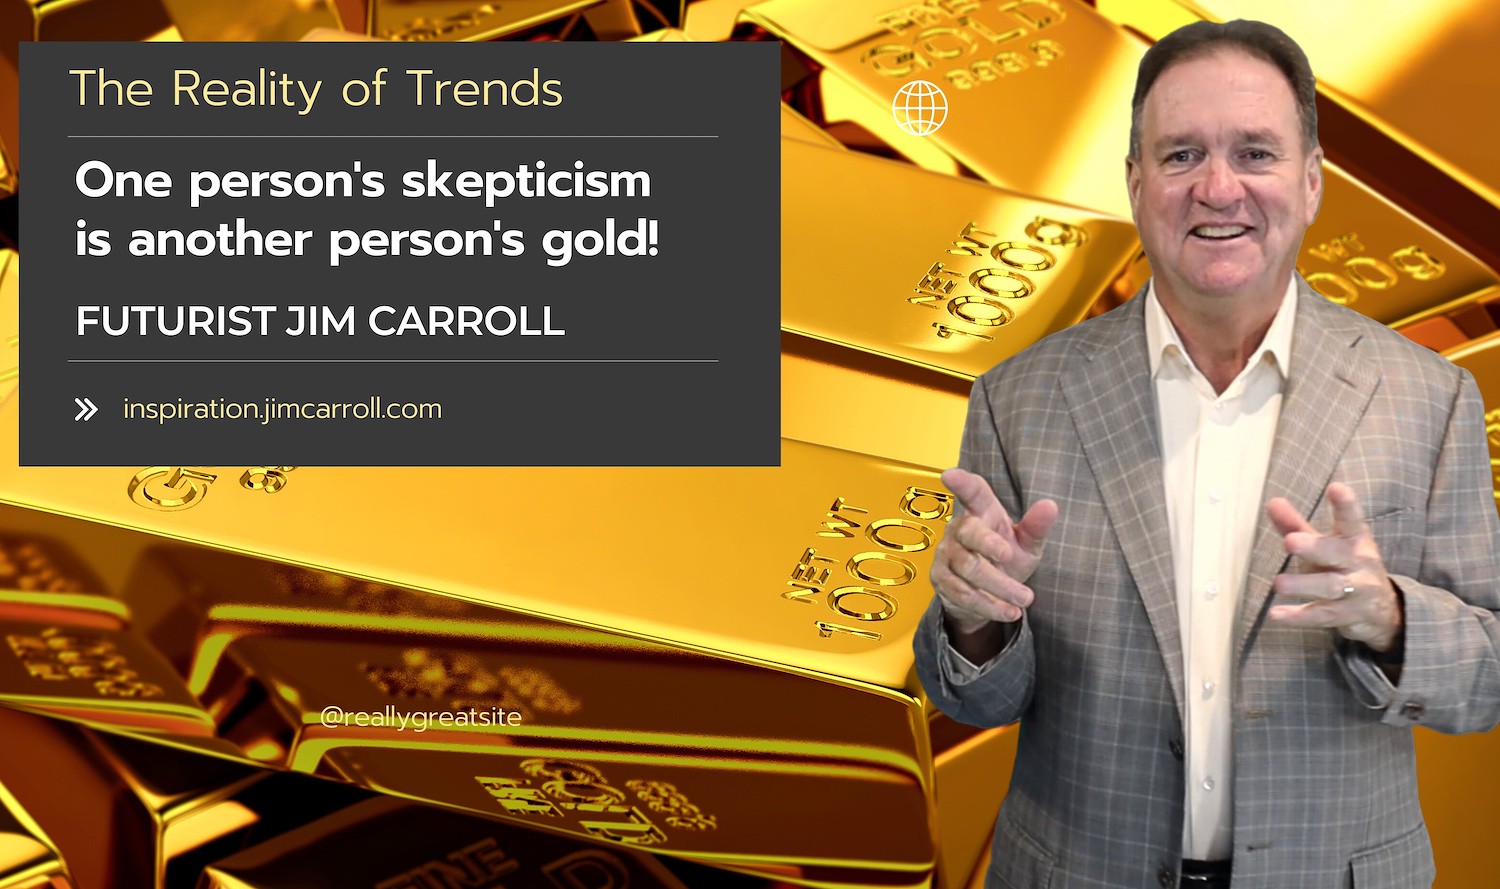 Daily Inspiration: "One person's skepticism is another person's gold!" - Futurist Jim Carroll